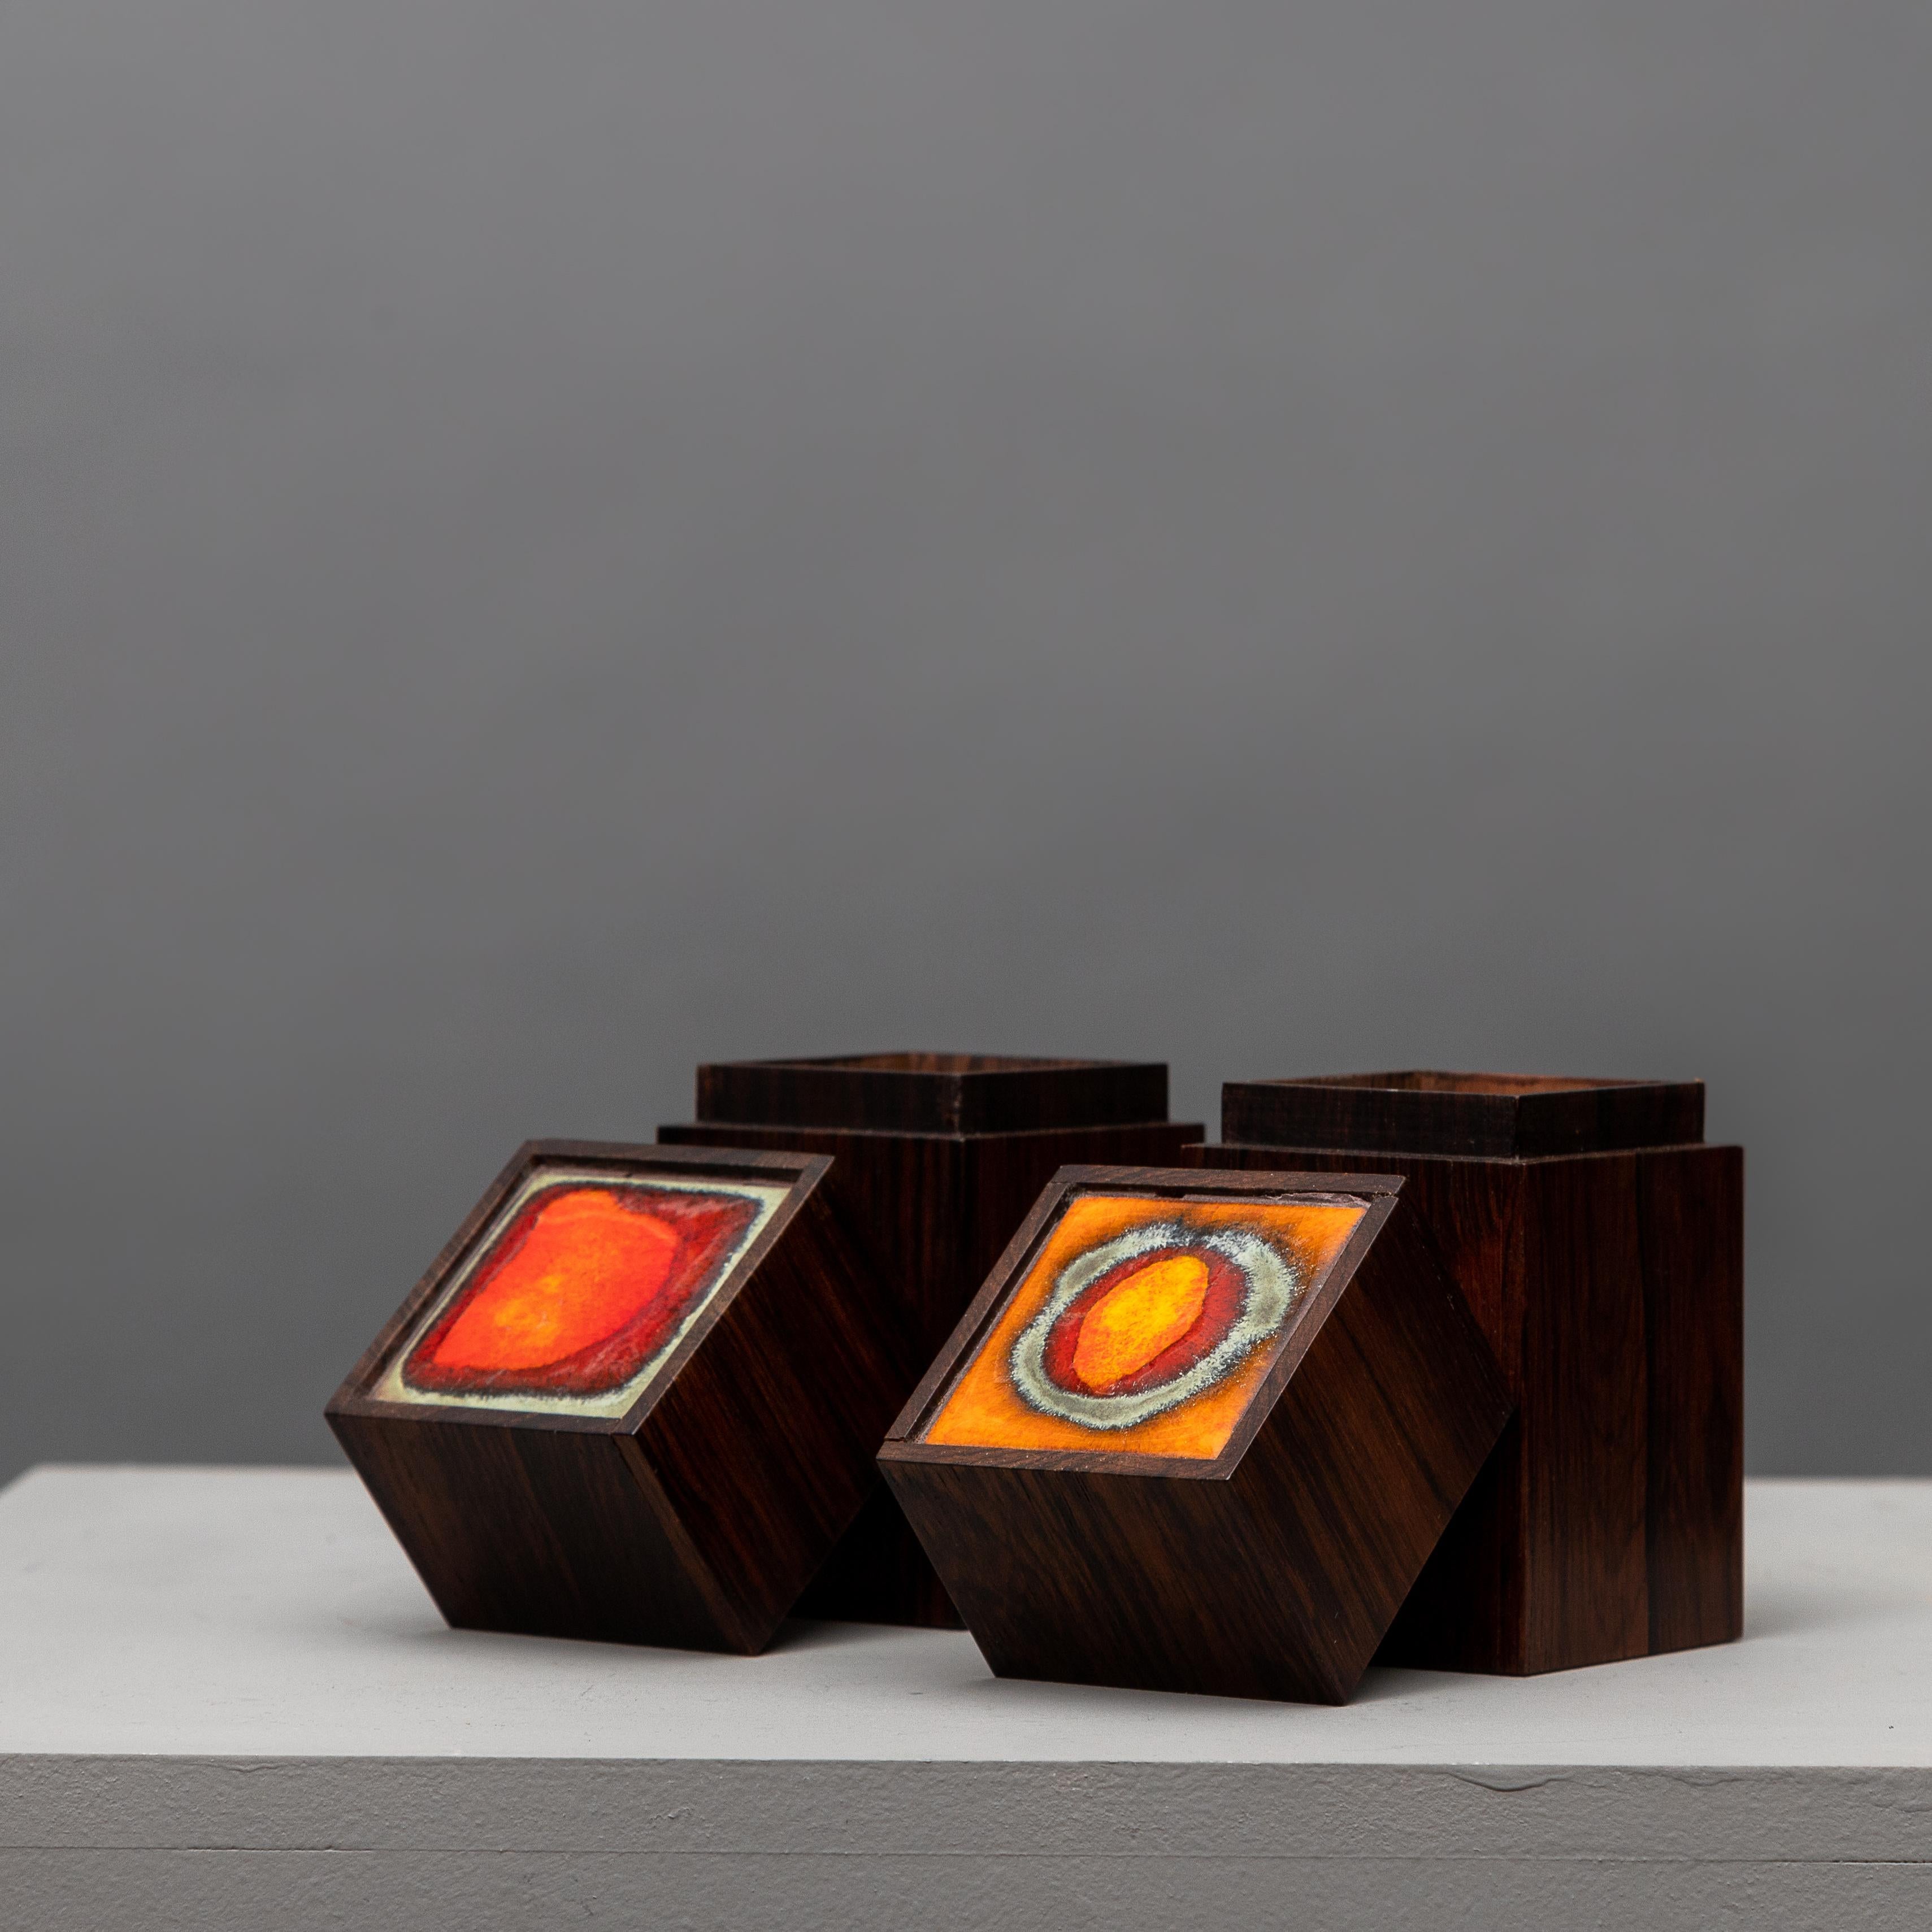 Midcentury Scandinavian manufactured by Klitgaard rosewood cigar boxes 1960s enameled terracotta tiles.
Exquisite boxes from the Danish manufacture Alfred Klitgaard in massive rosewood, decorated with tile with enameled glaze.
 